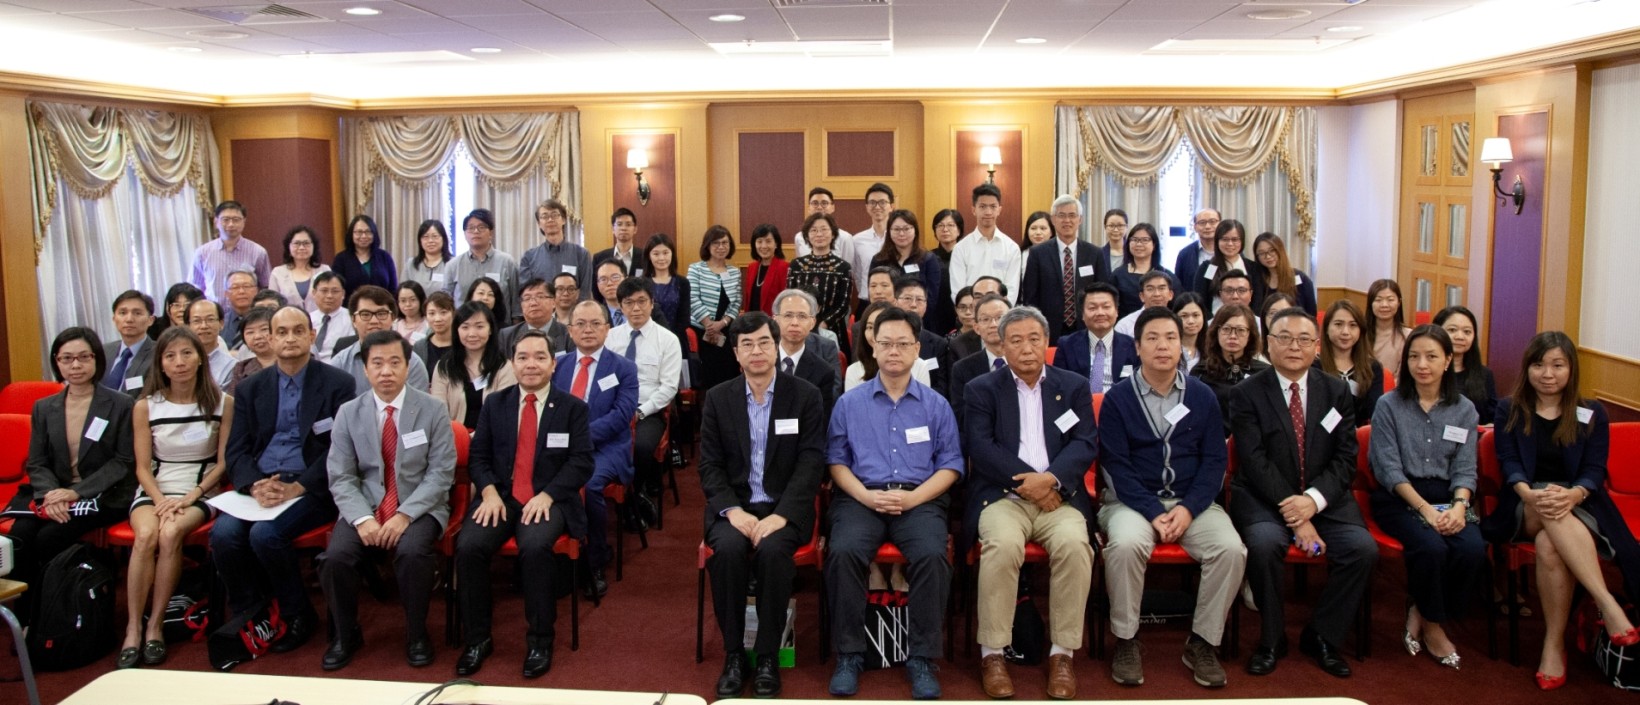 Lingnan University launches Bachelor of Arts (Honours) in Global Liberal Arts and LEO Dr David P. Chan Bachelor of Science (Honours) in Data Science